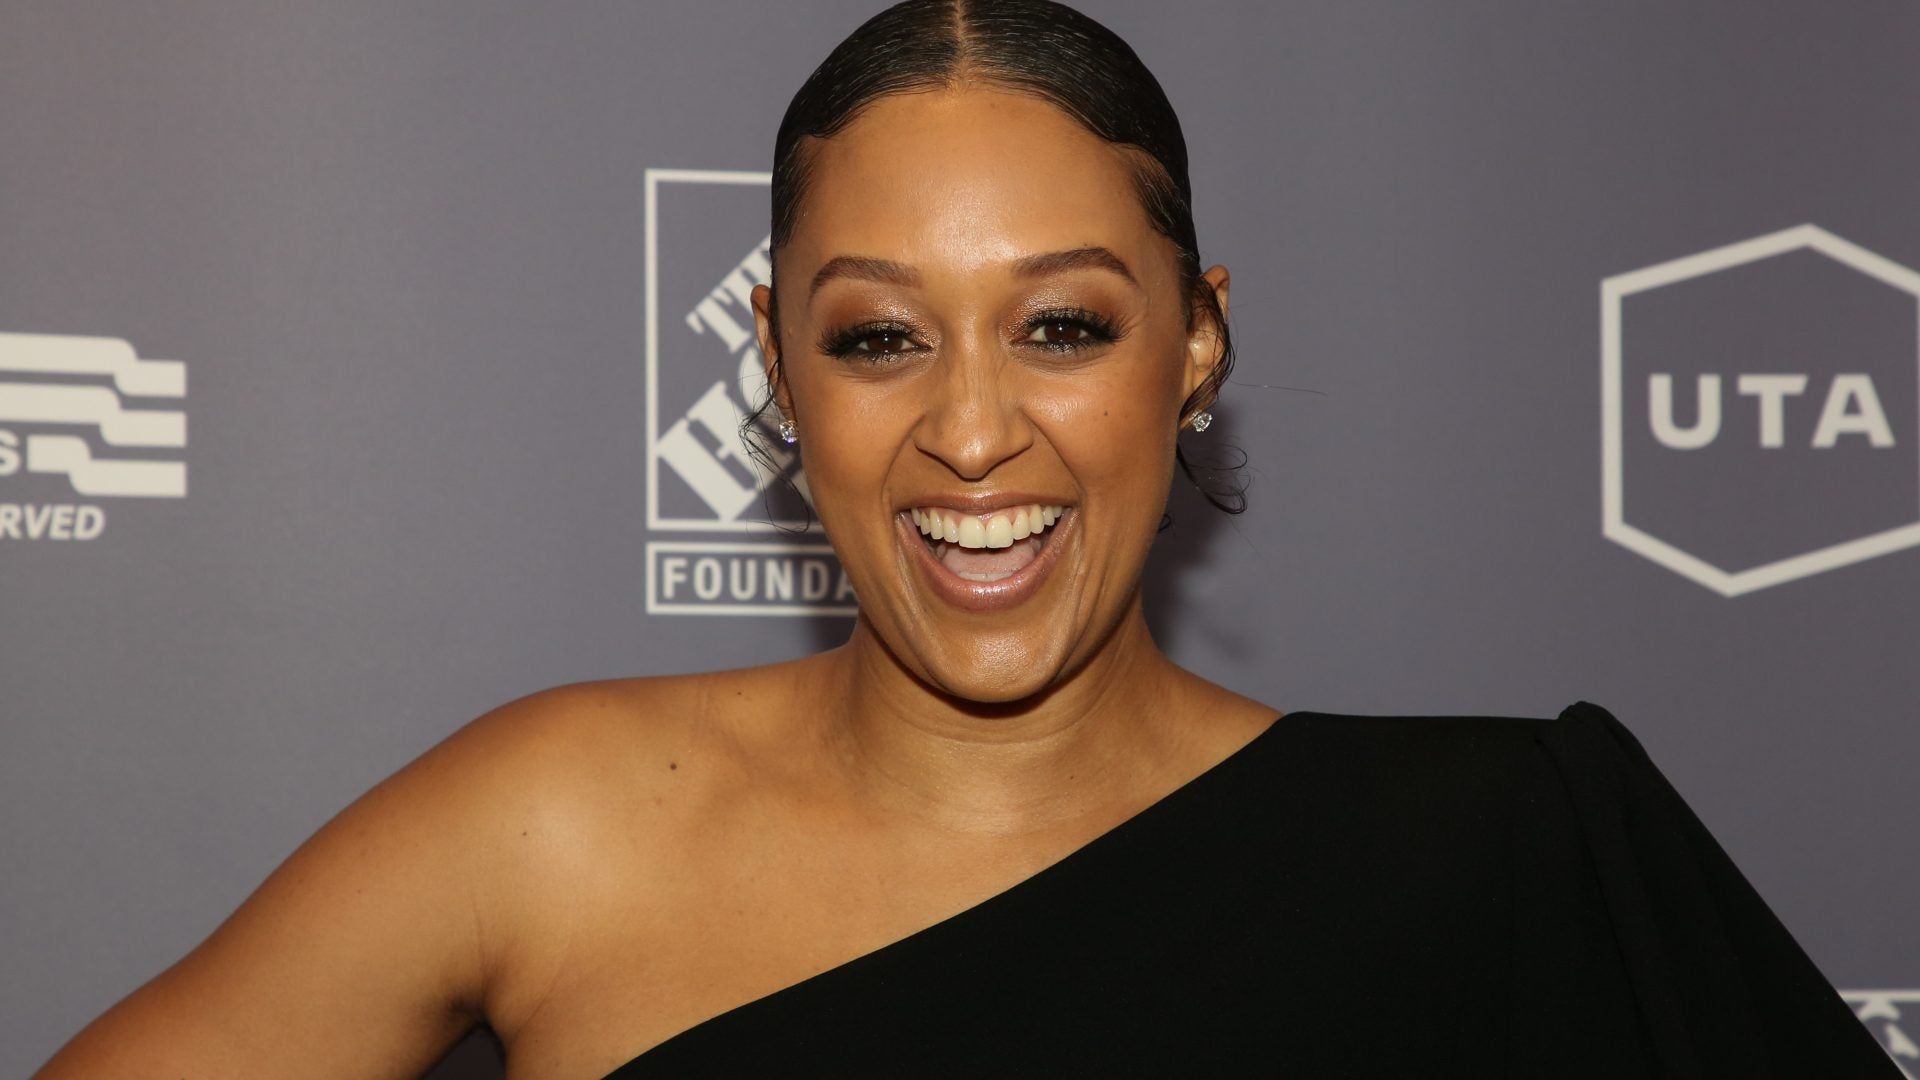 Tia Mowry Hardrict Dresses Her Daughter Cairo As The Cutest Baby Chef